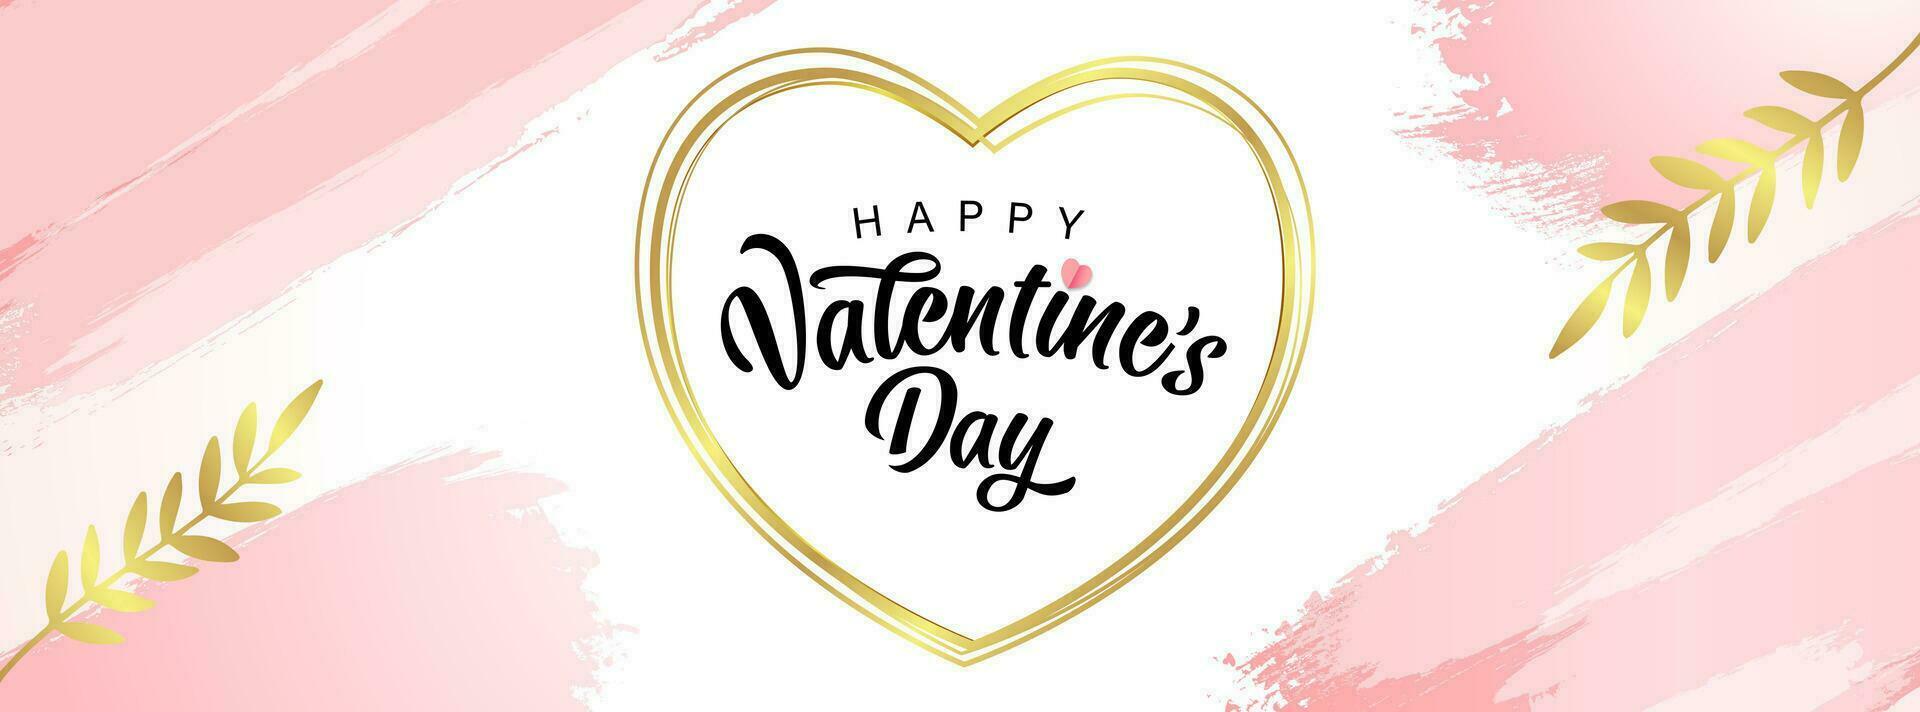 Happy Valentine's Day banner with golden heart frame, palm leaves and watercolor spots. vector